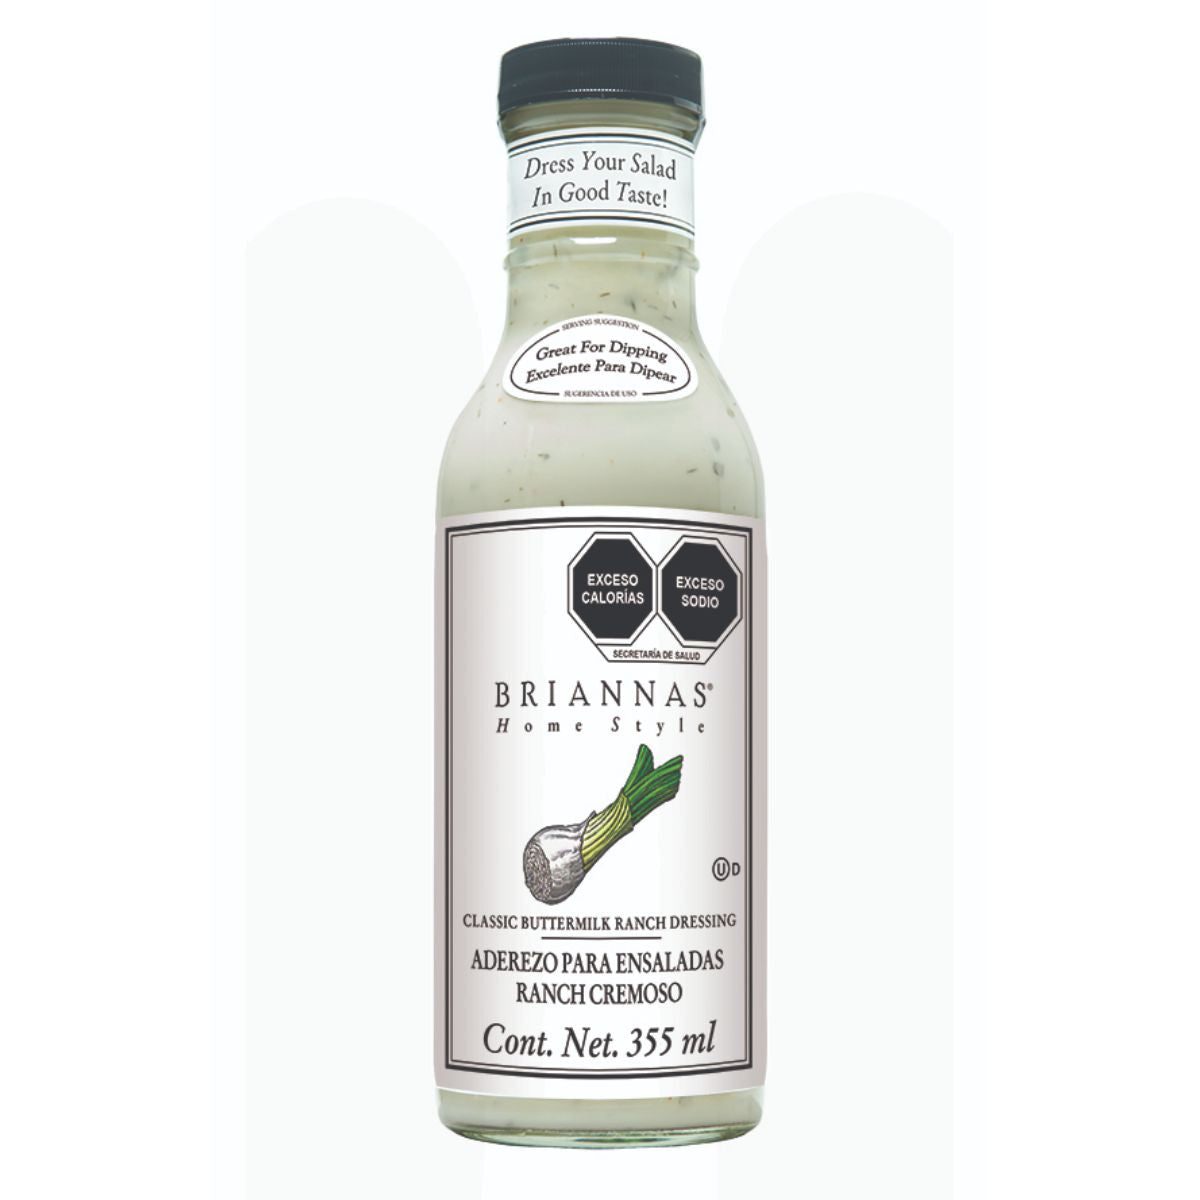 Brianna's Home Style Classic Buttermilk Ranch Dressing - 335ml.